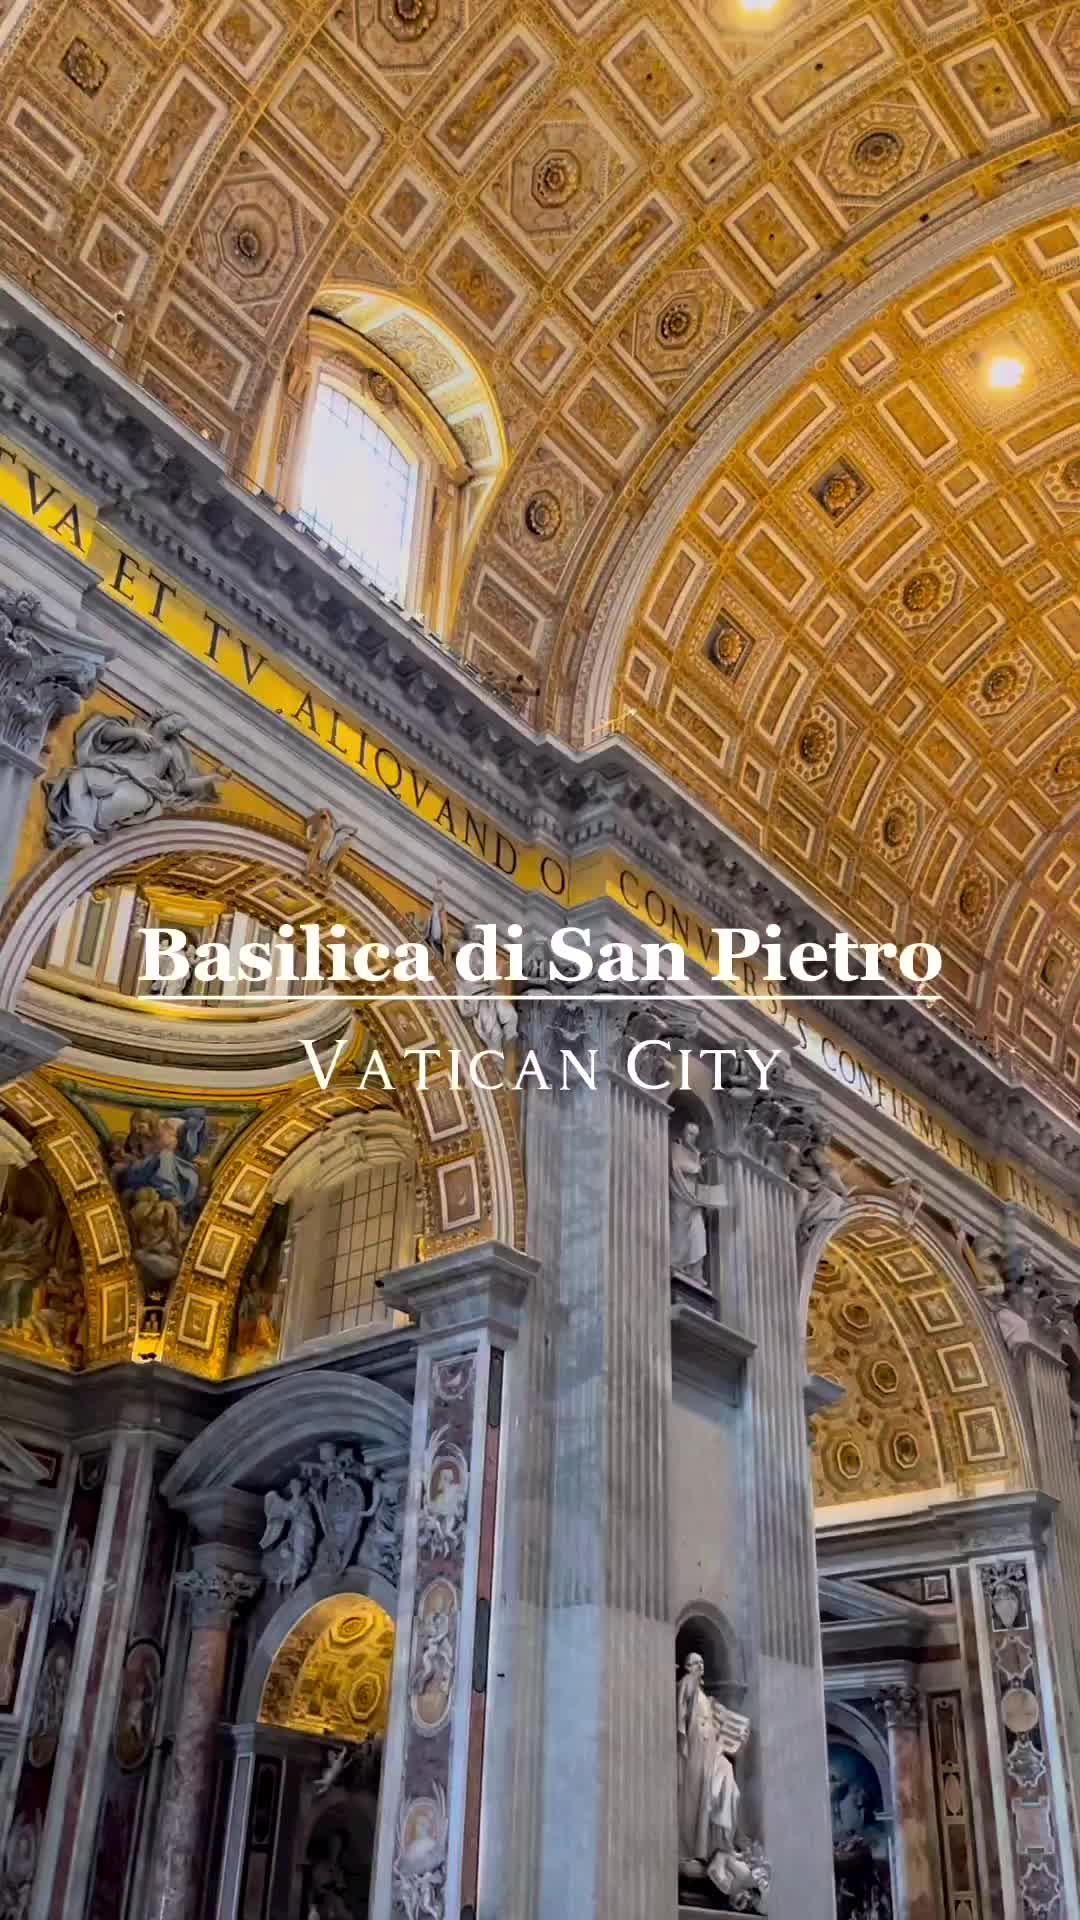 Top 10 Travel Tips for Visiting St. Peter’s Basilica